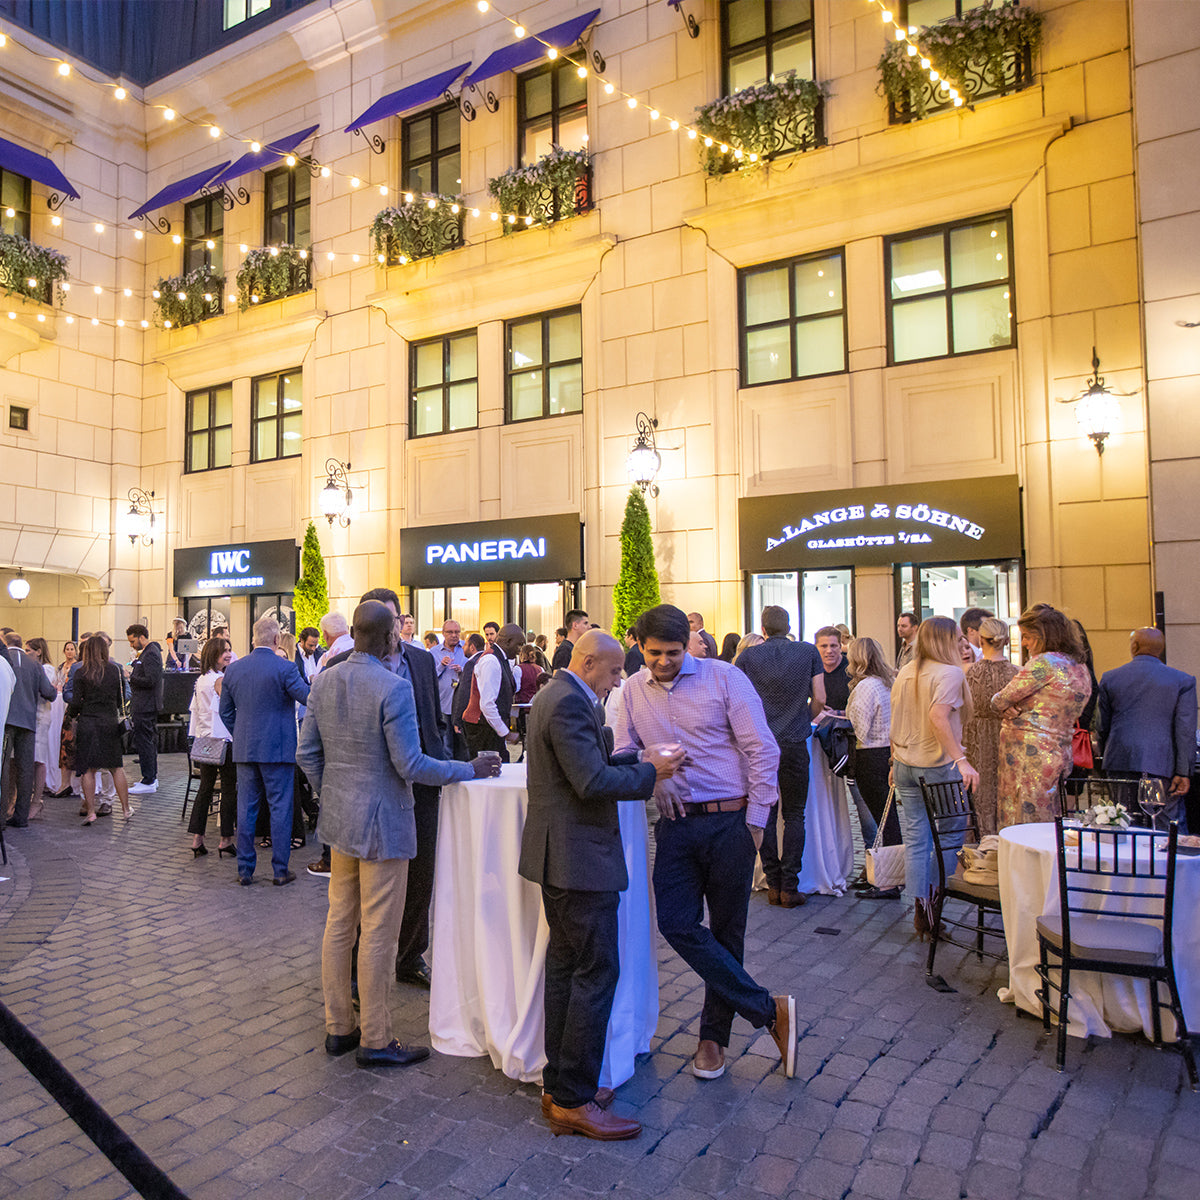 Grand Opening event held at the Waldorf Astoria Hotel featuring clients on the courtyard.